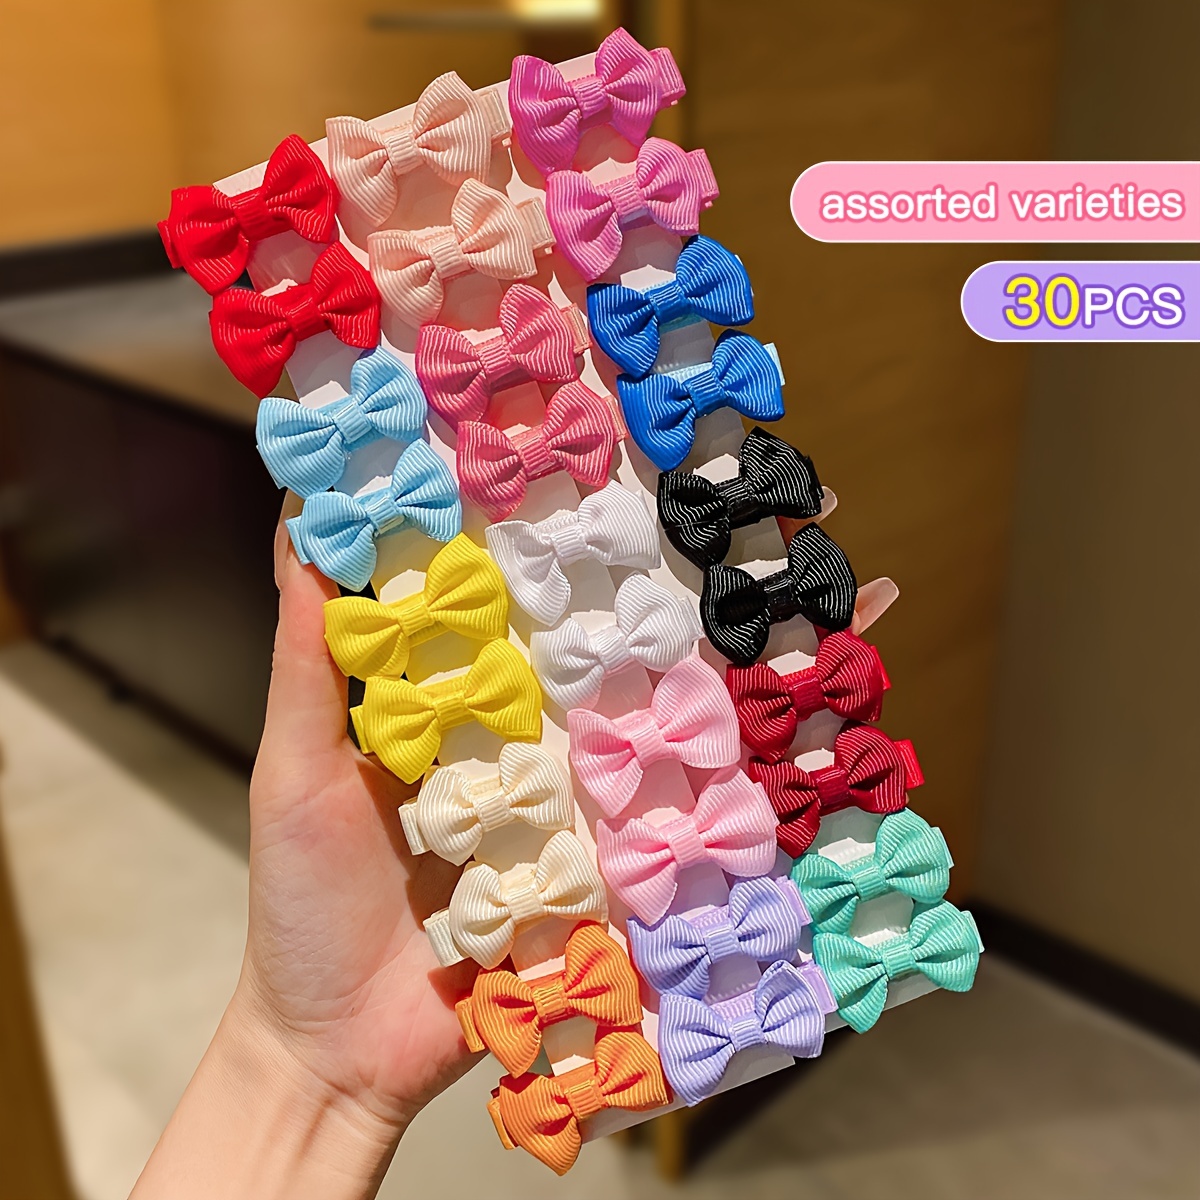 

30pcs Fashion And Cute Bow Hairband, Versatile And Easy-to-use For Girls